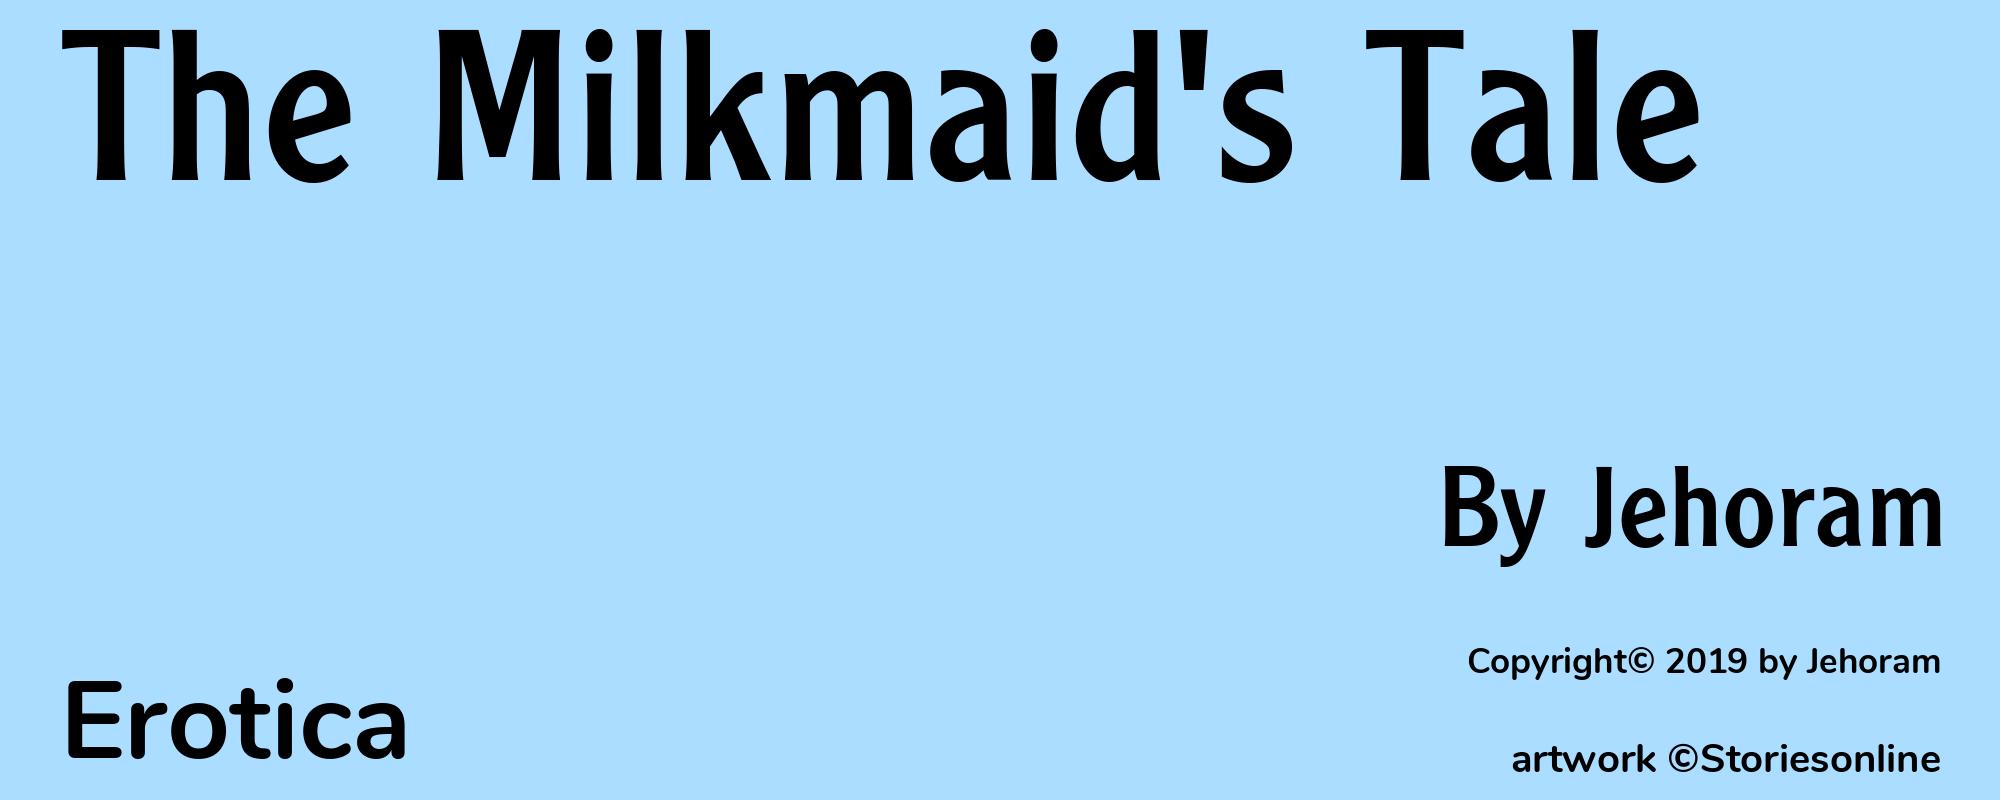 The Milkmaid's Tale - Cover